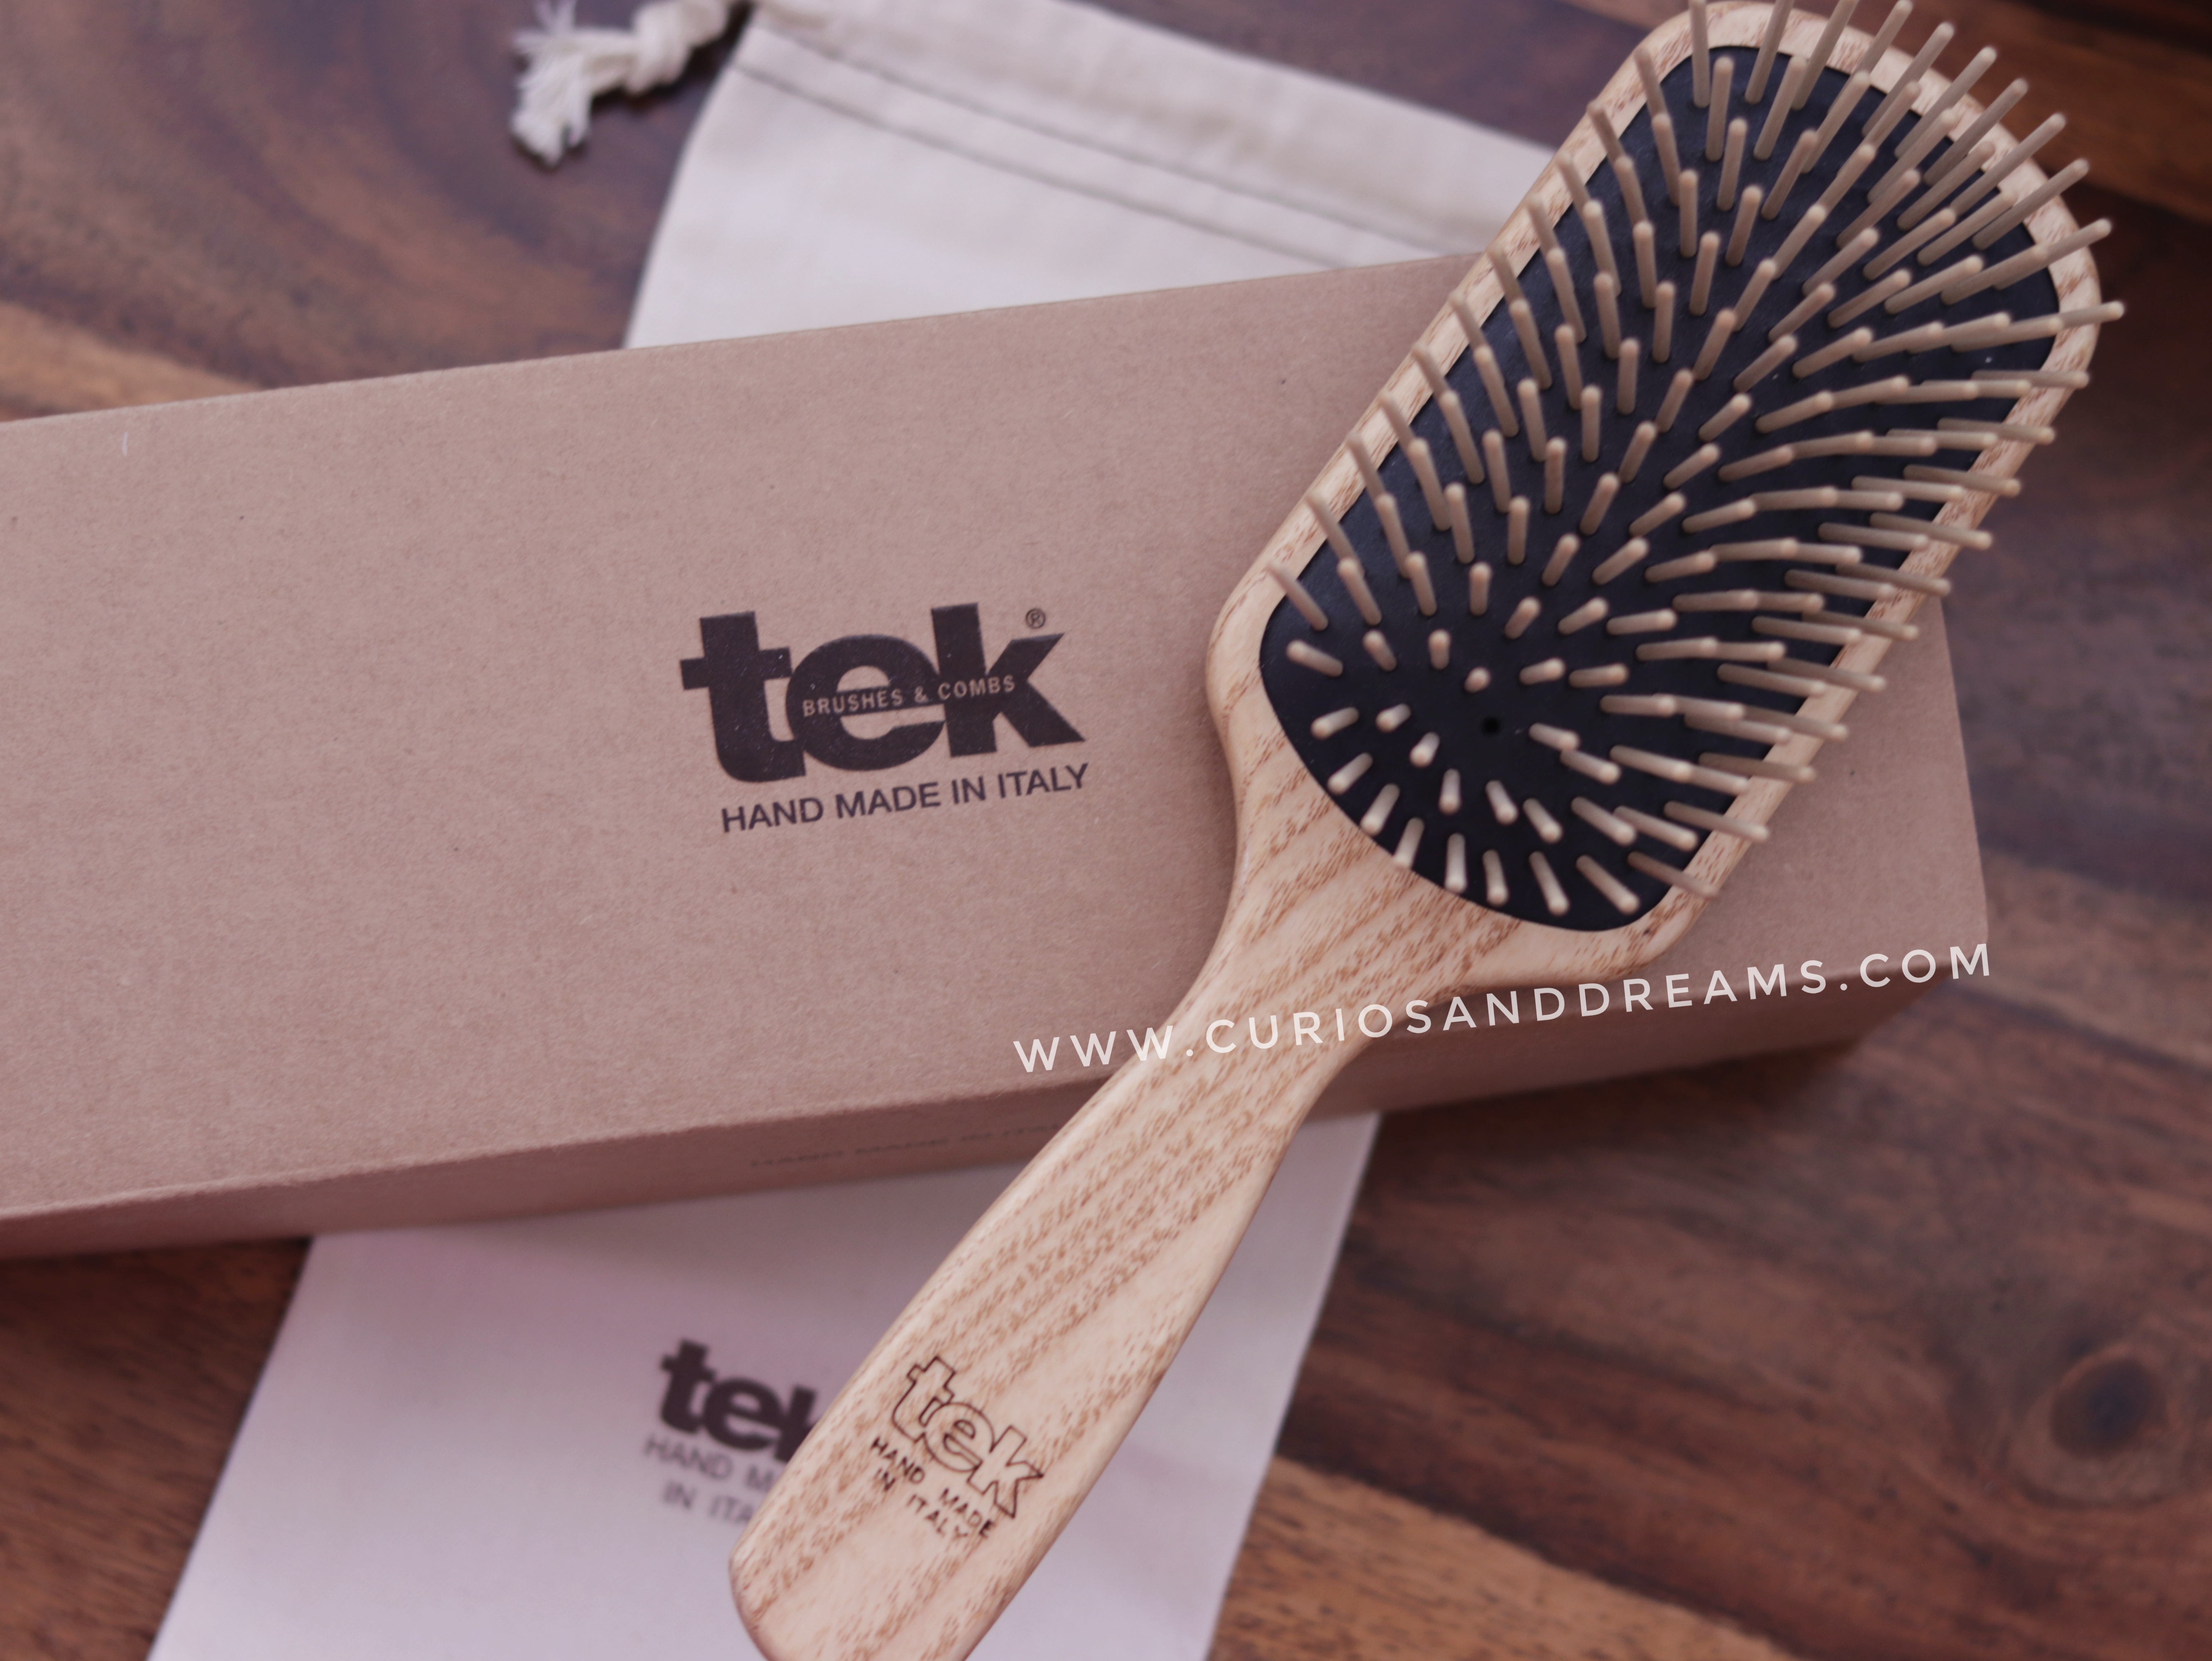 Tek Hair Brush & Comb - Curios and Dreams - Indian Skincare and Beauty